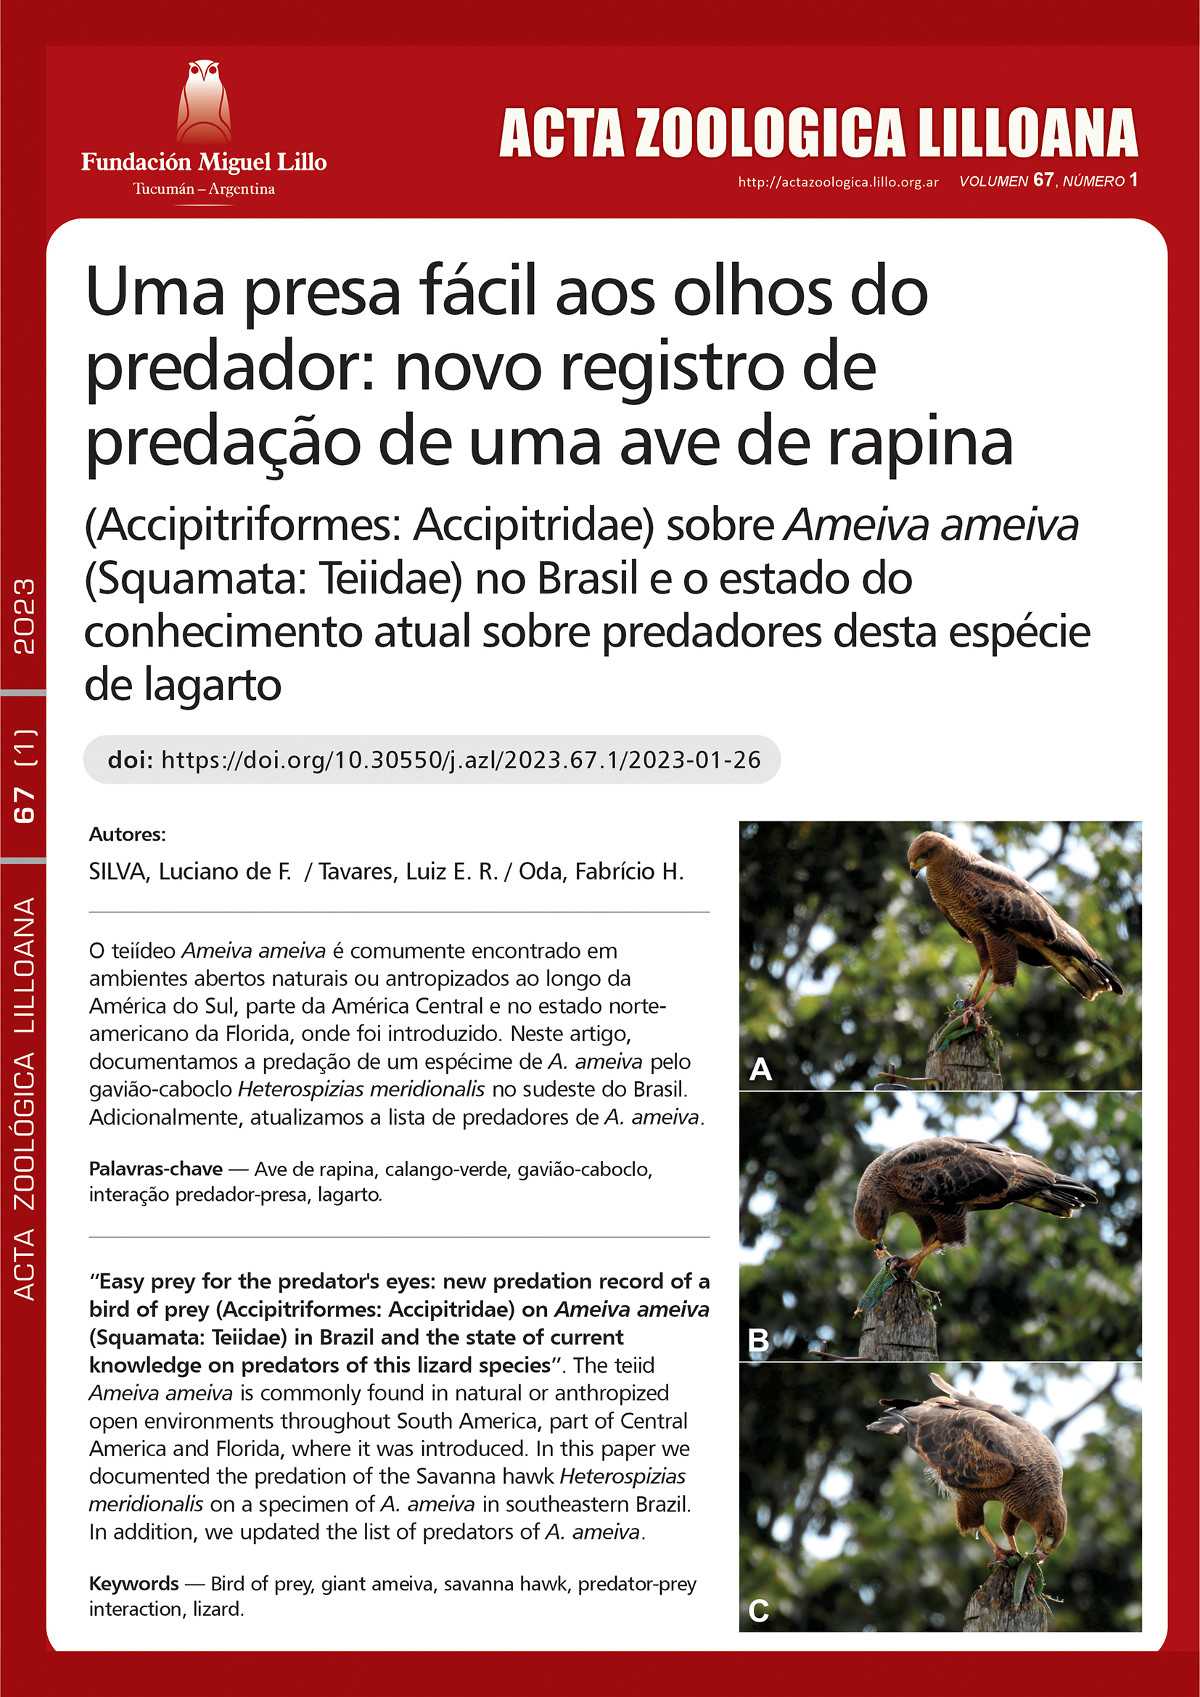 Easy prey for the predator’s eyes: new predation record of a bird of prey (Accipitriformes: Accipitridae) on Ameiva ameiva (Squamata: Teiidae) in Brazil and the state of current knowledge on predators of this lizard species